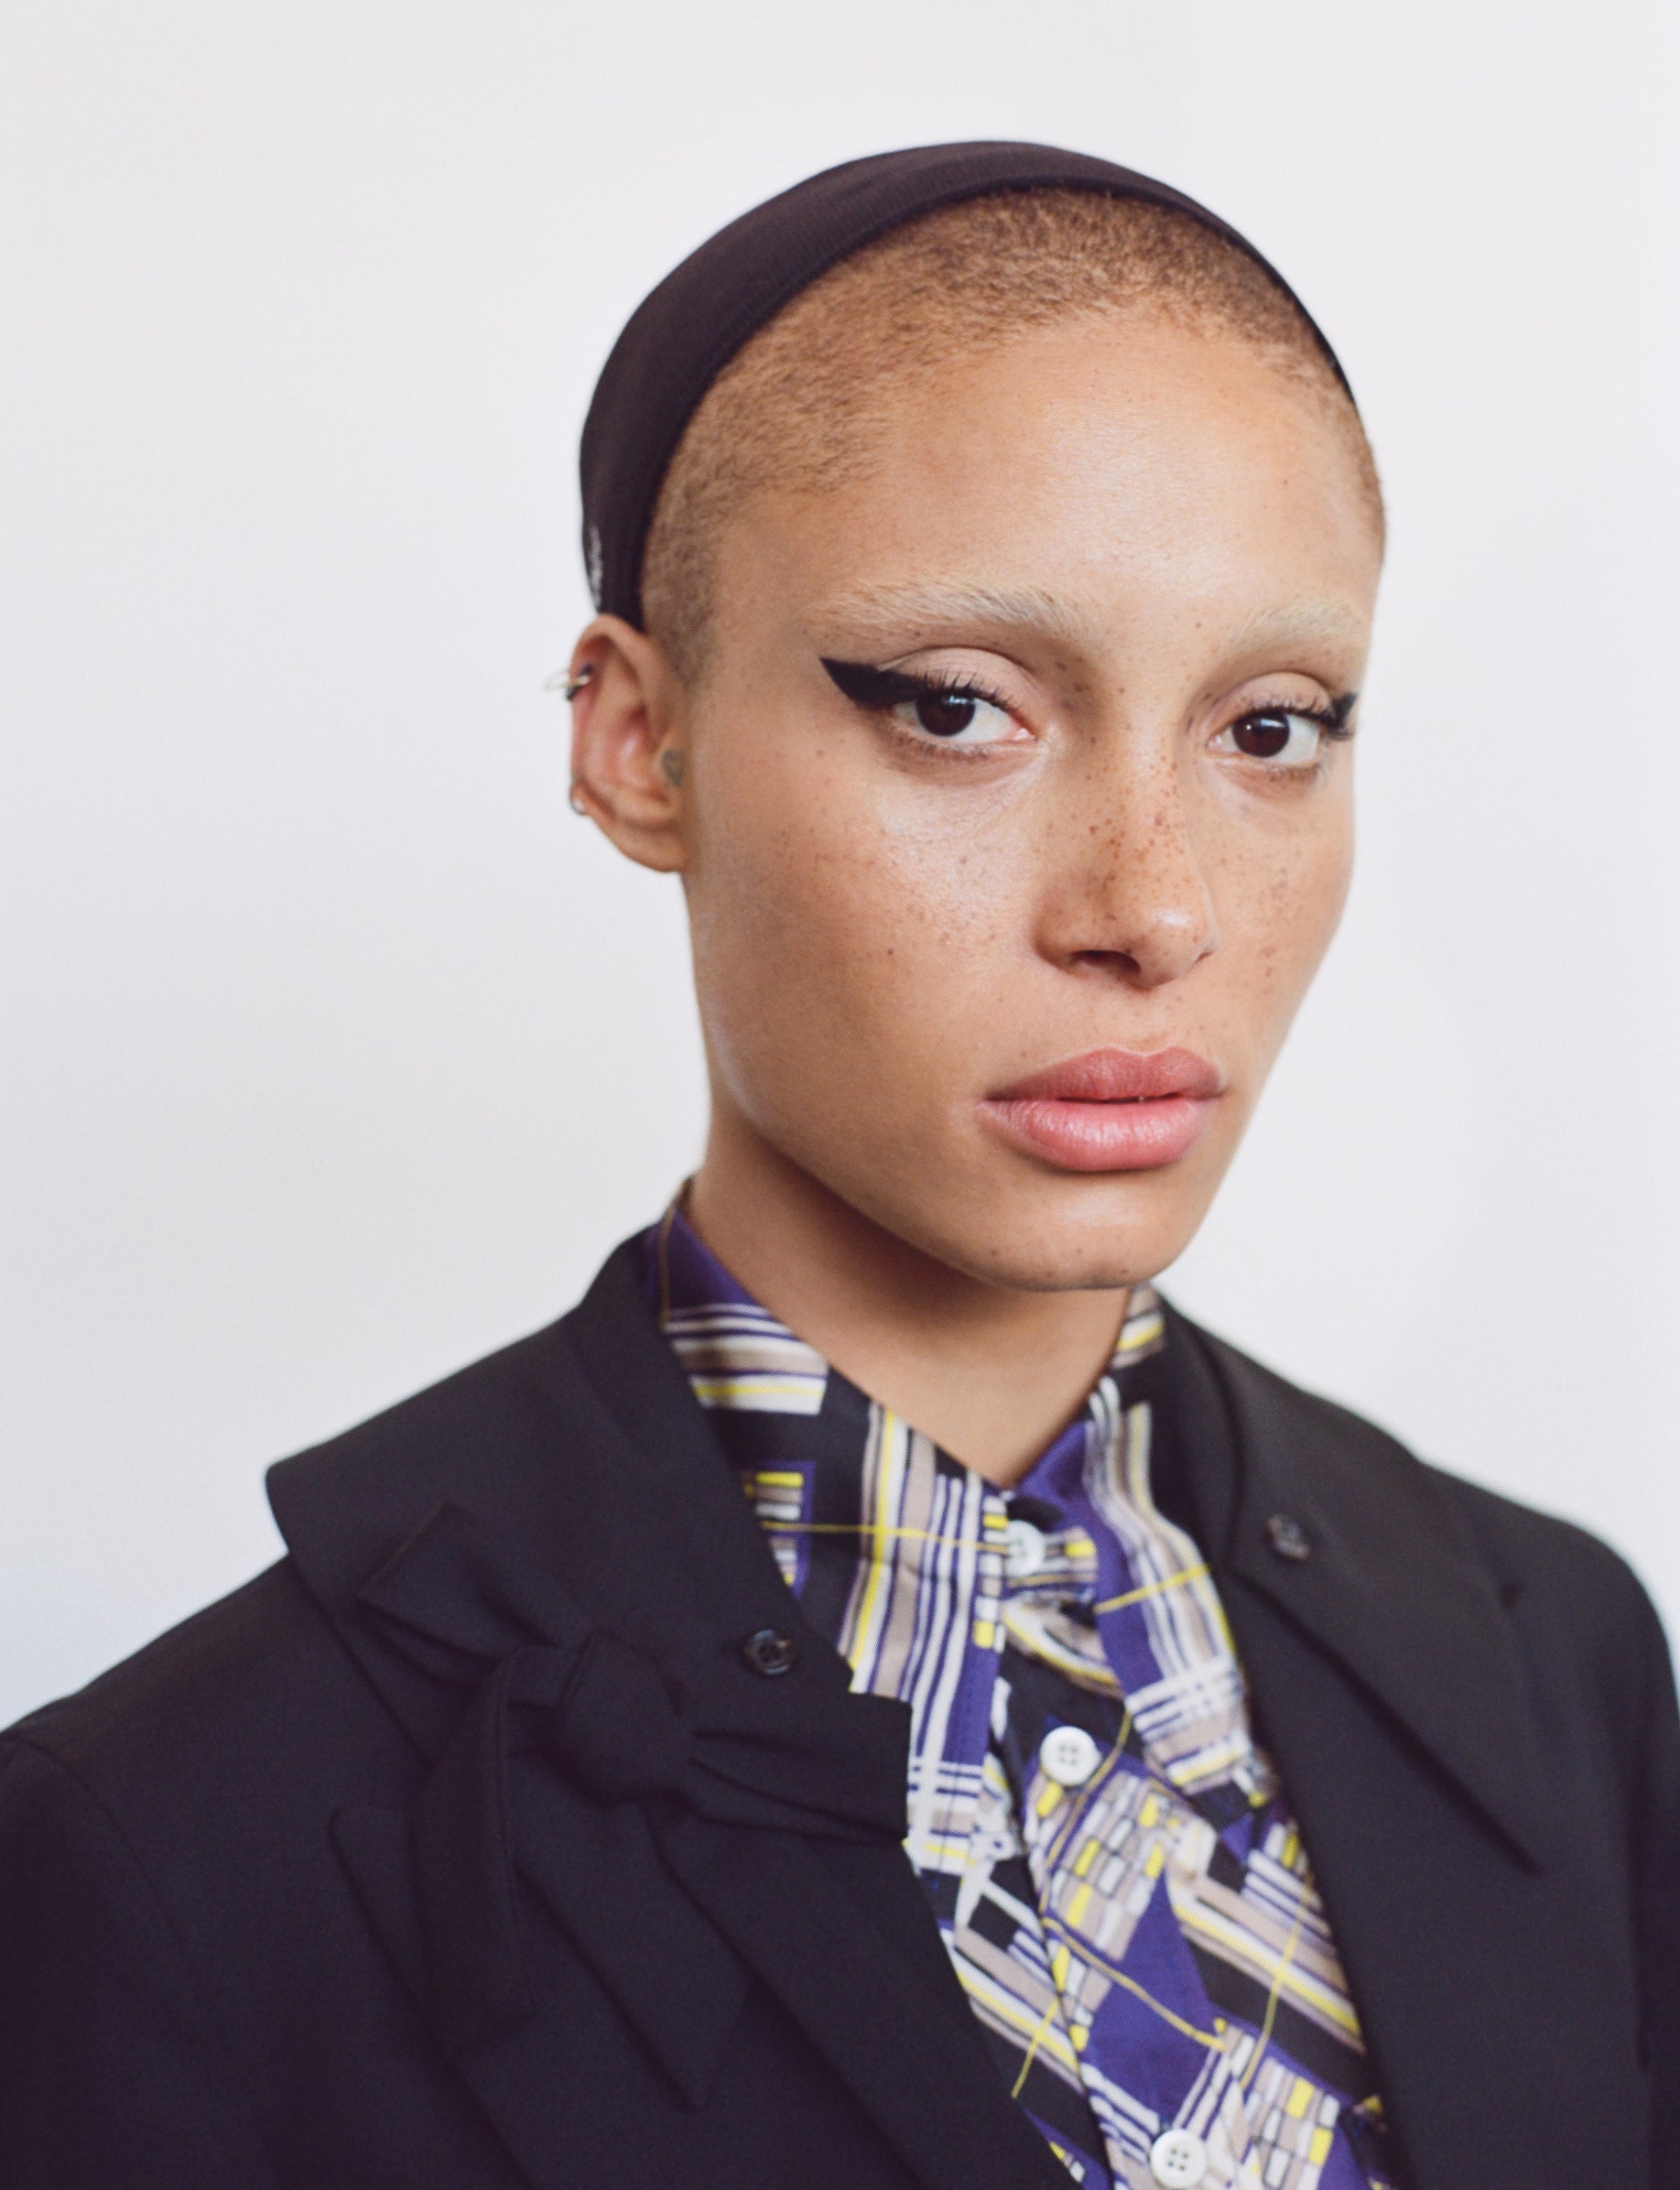 Supermodel And Activist Adwoa Aboah Talks Coping With Your Mental Health During This Time